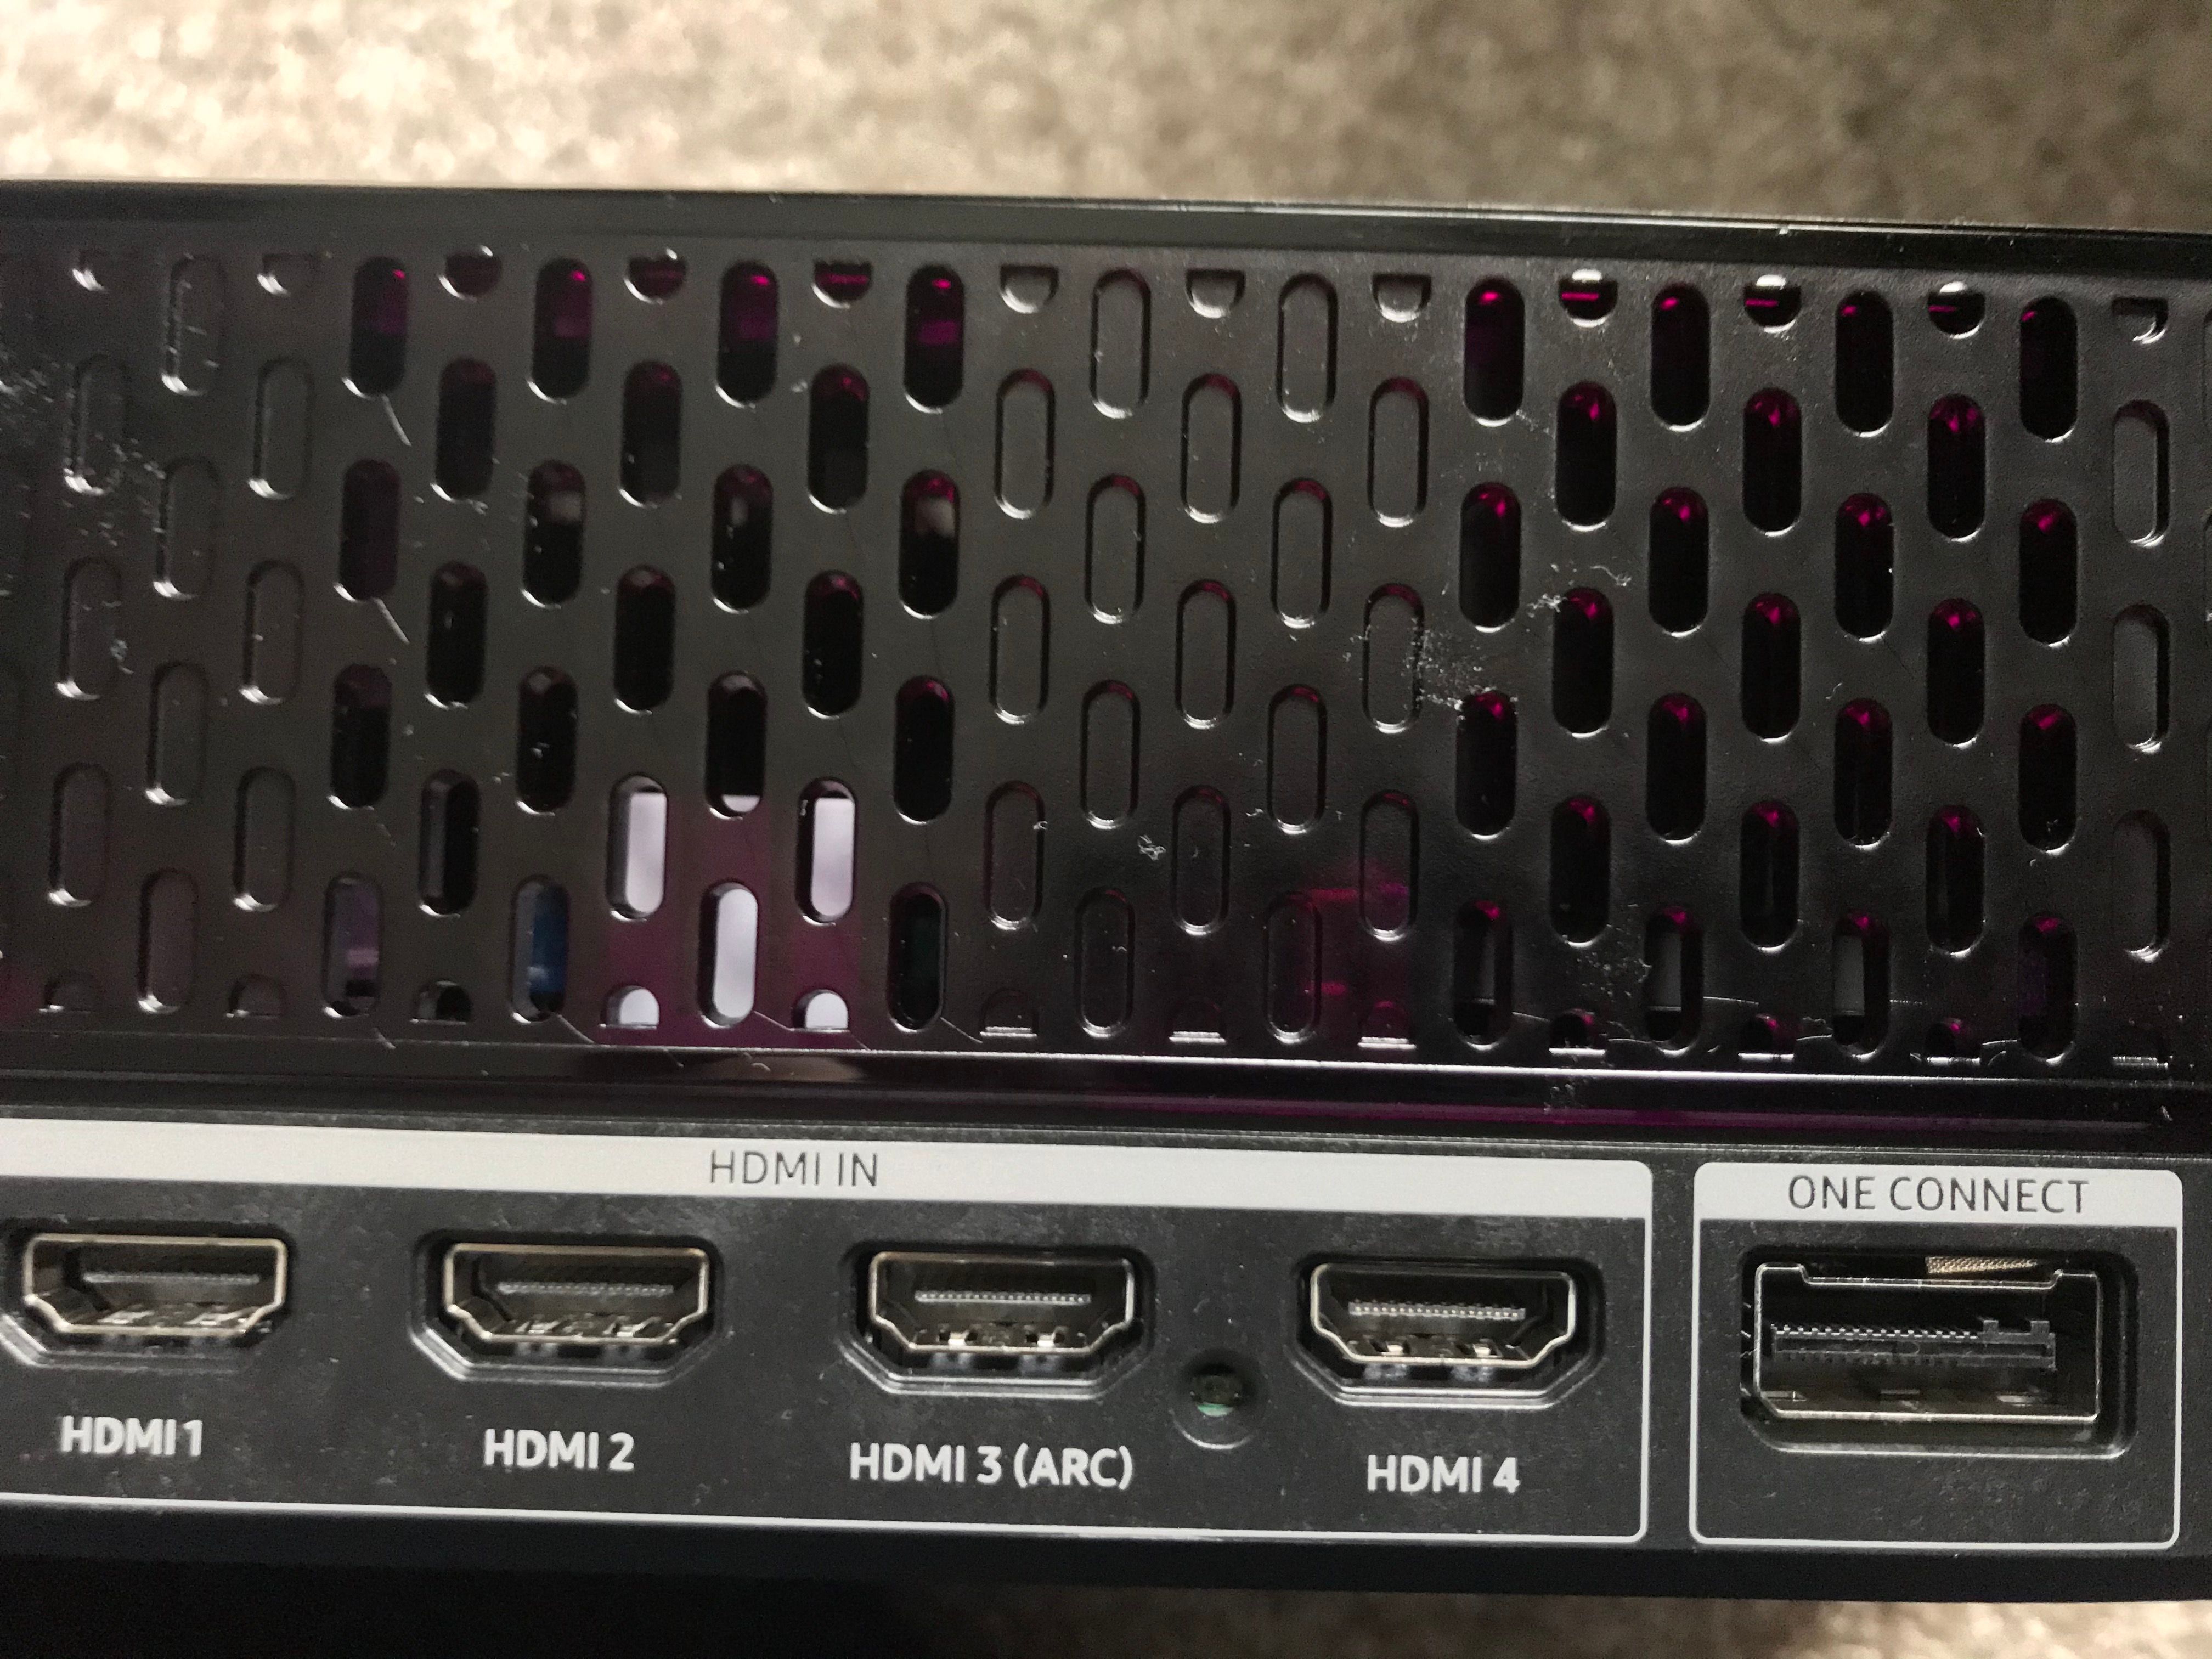 Solved: 8K Q900R. One connect box swapping HDMI 2.1 - Samsung Community